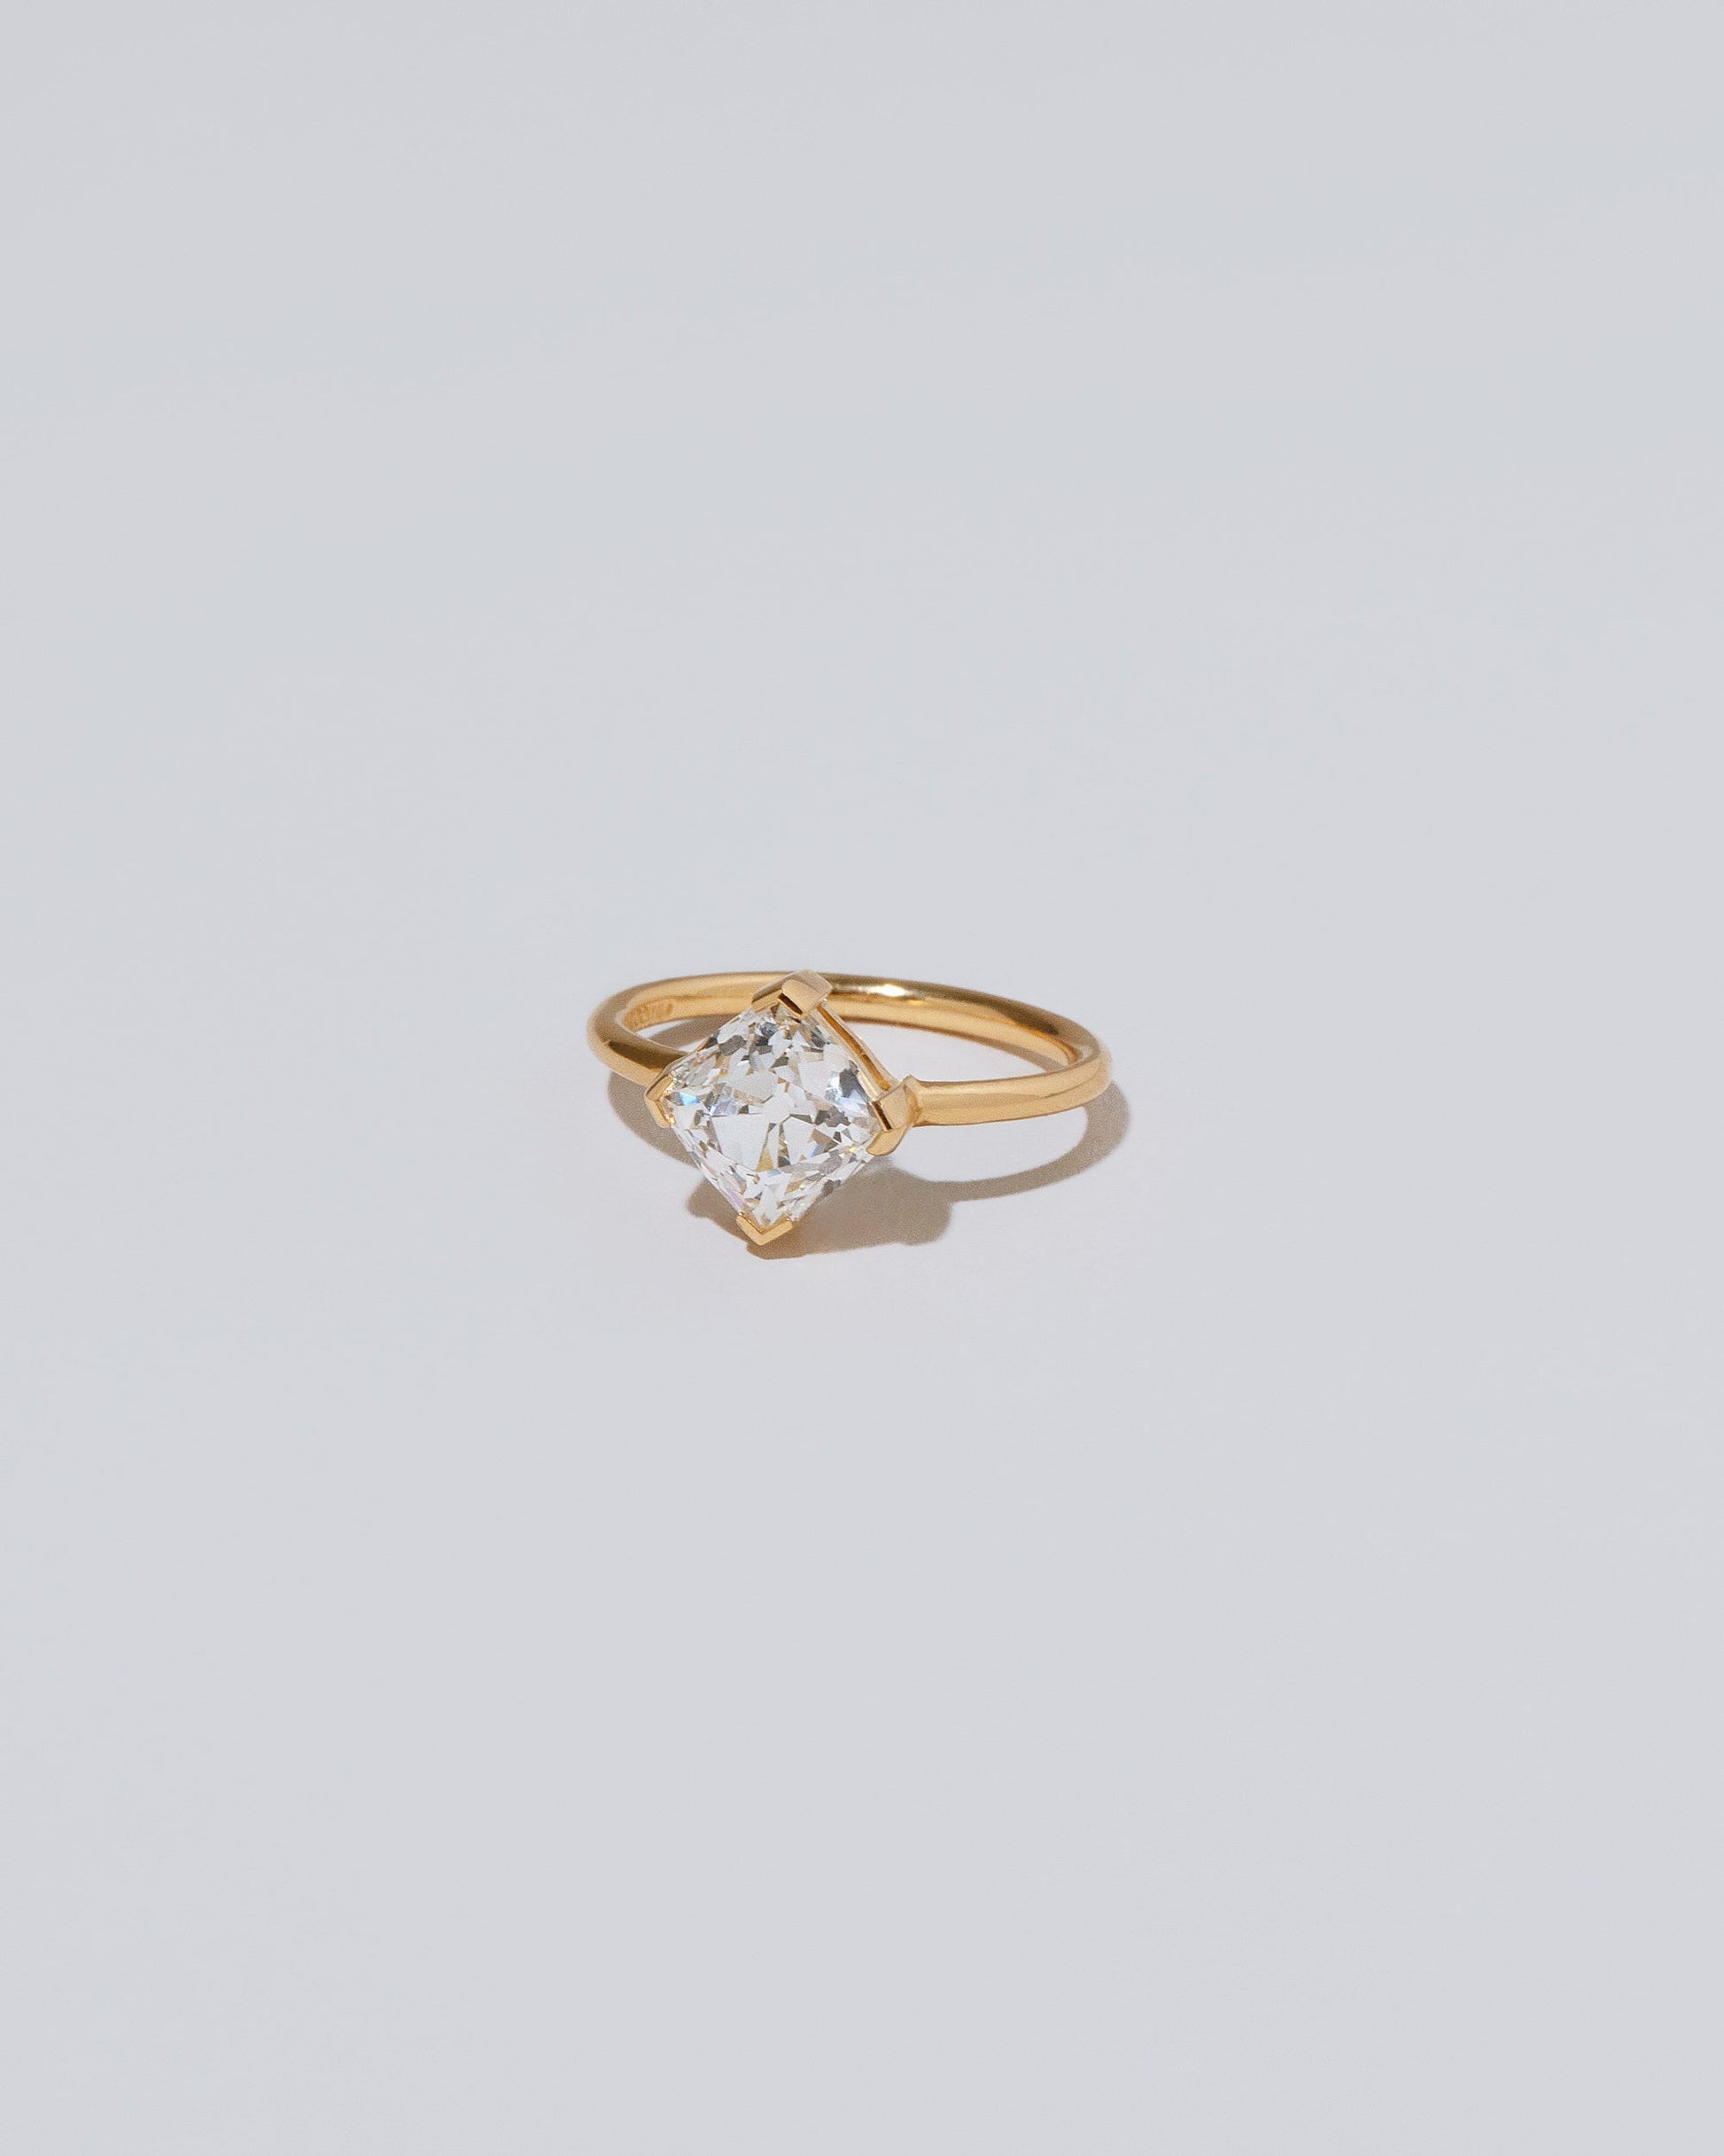 Product photo of the Sauté Ring on light color background